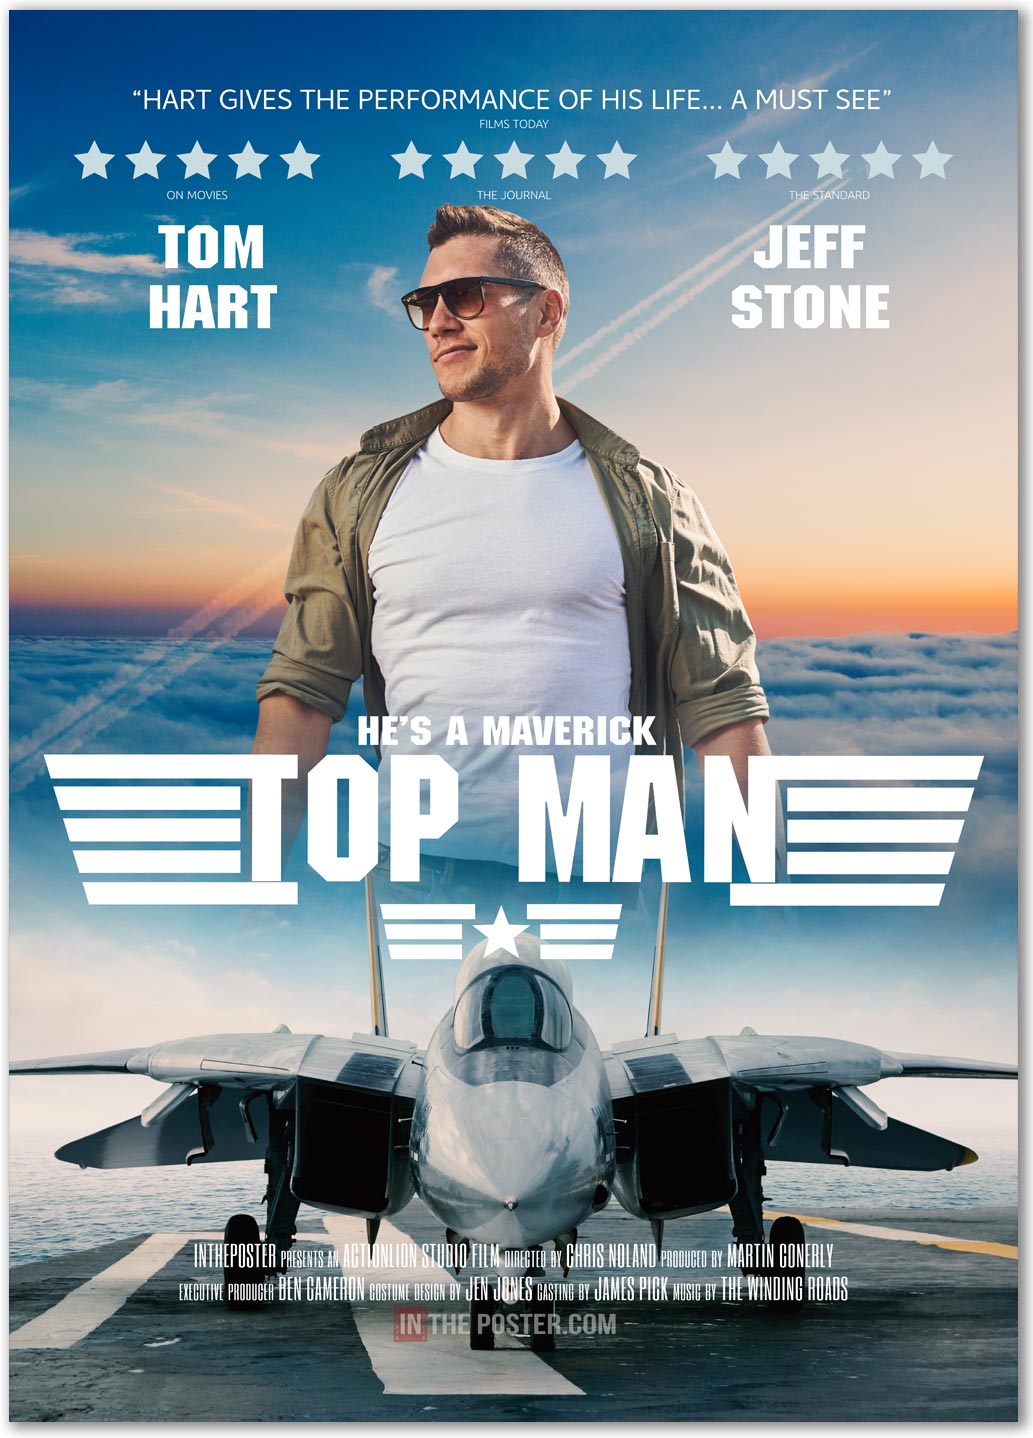 Custom film poster with a  fighter jet on a runway at the bottom and a man in a green shirt and aviators against a sky blue background at the top